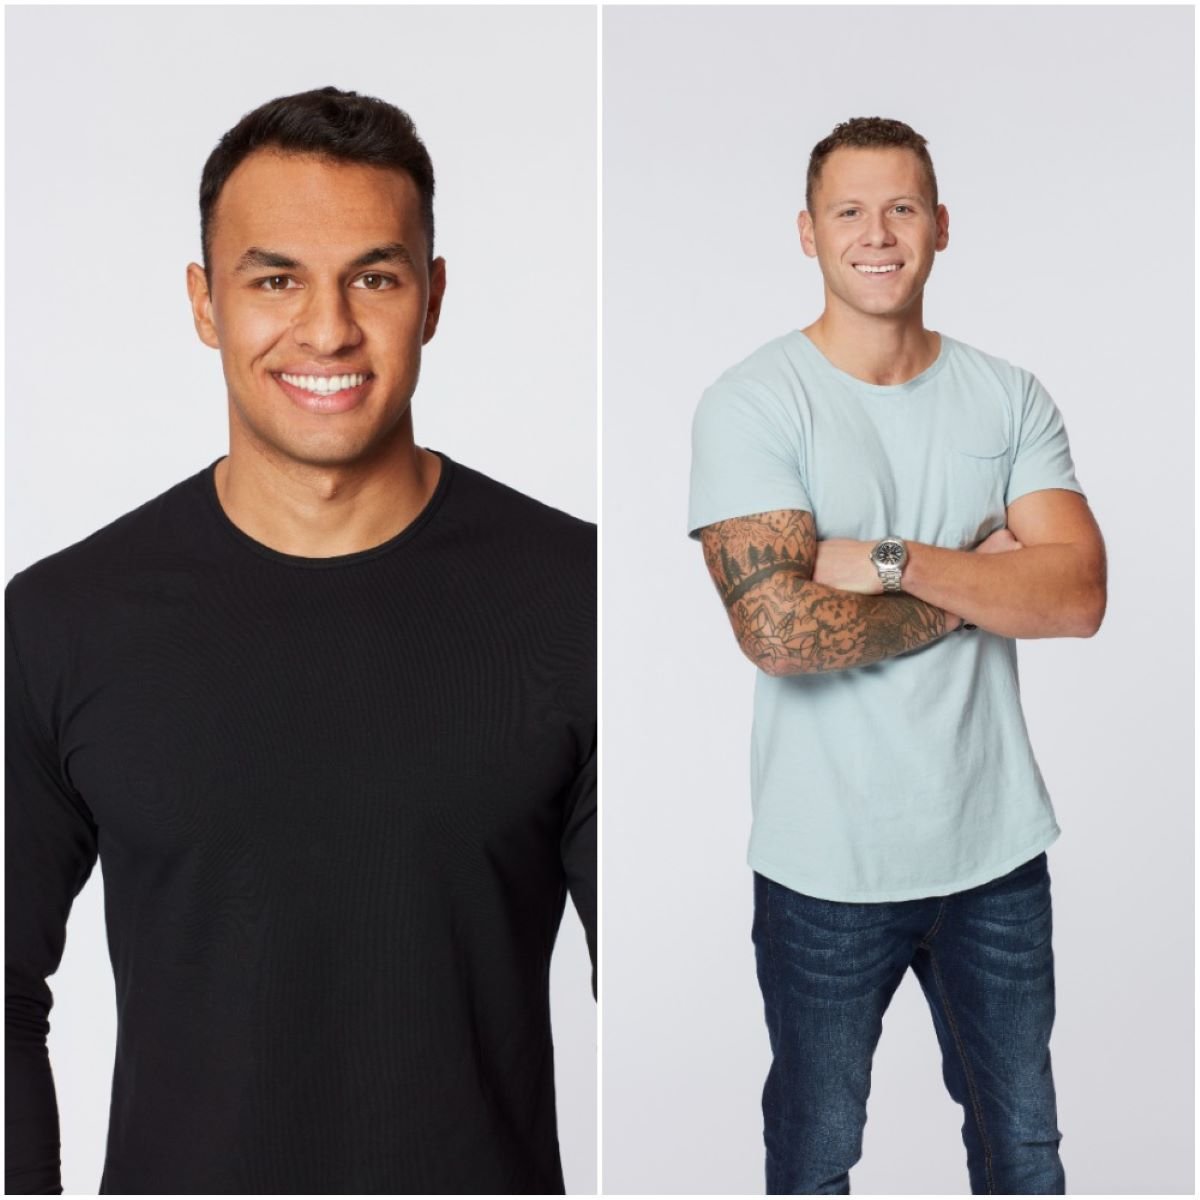 'The Bachelorette' contestants Aaron Clancy and Cody Menk side by side